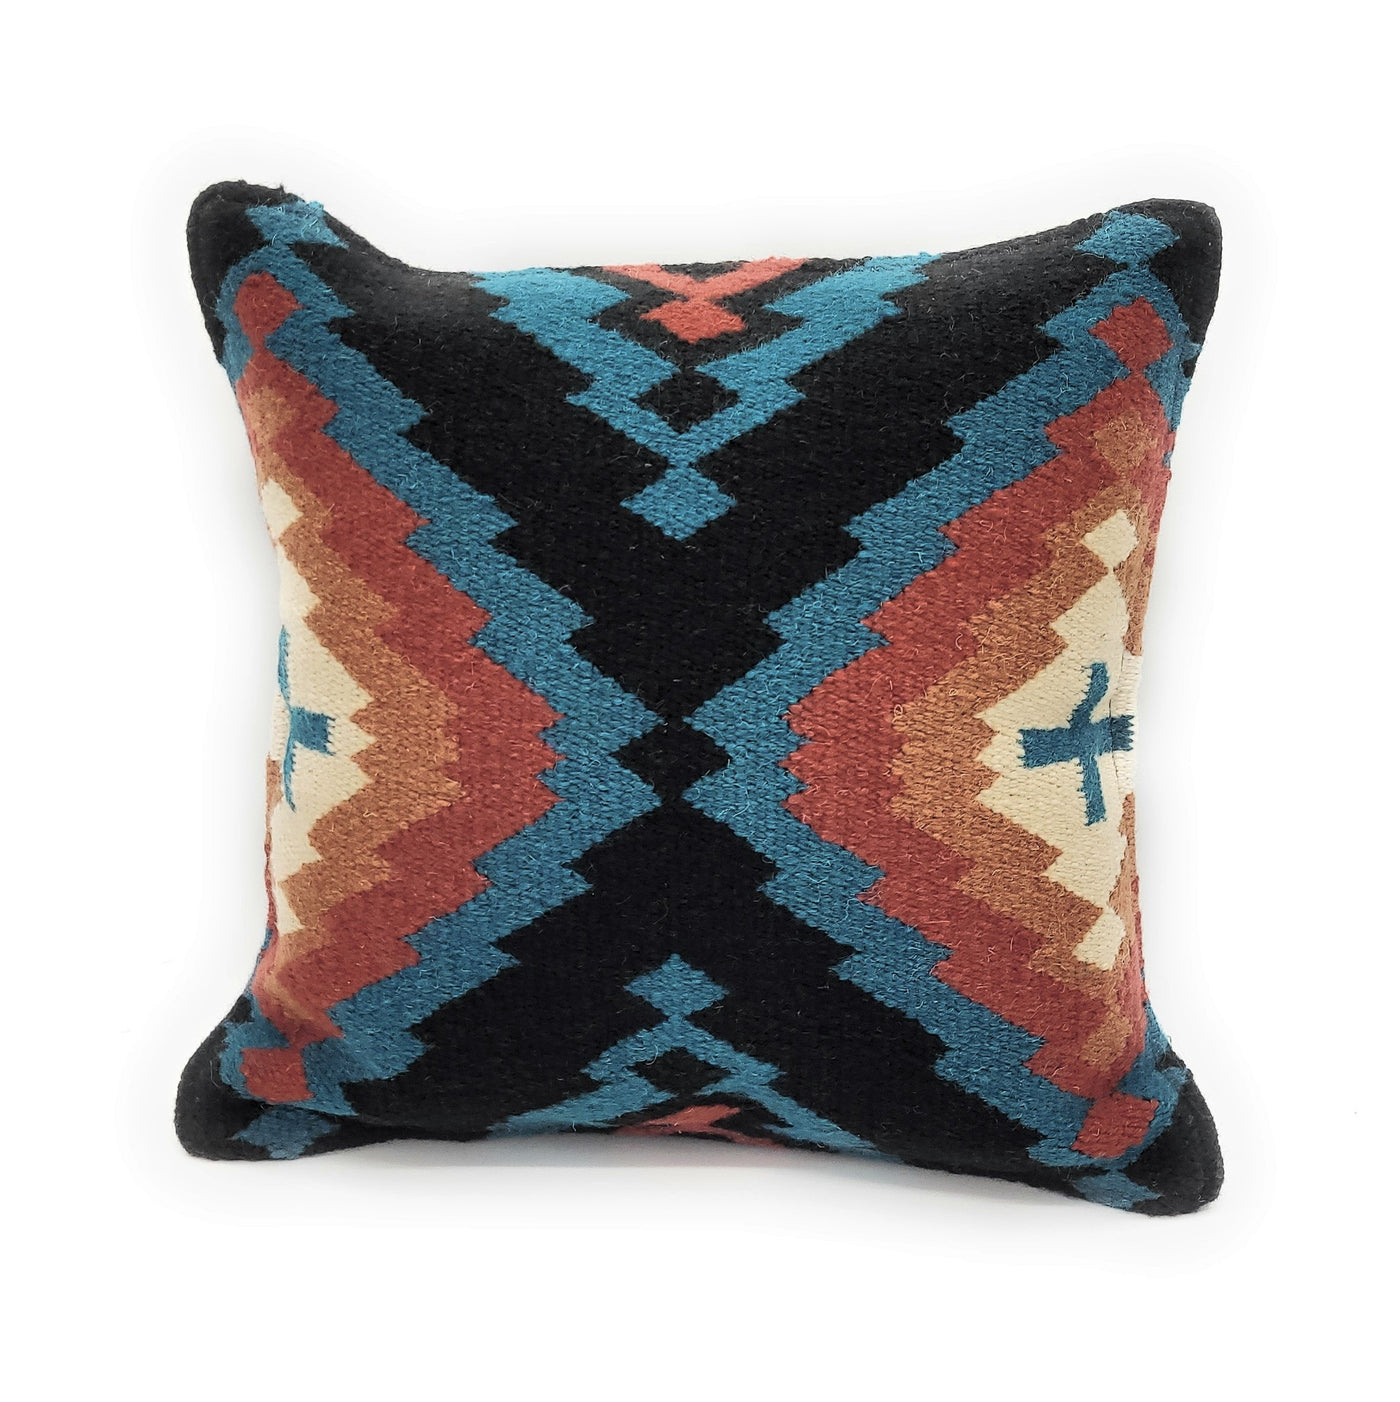 Western Pillow Covers 18 x 18 Woven Wool Turquoise Color Southwestern Decor  Throw Pillow